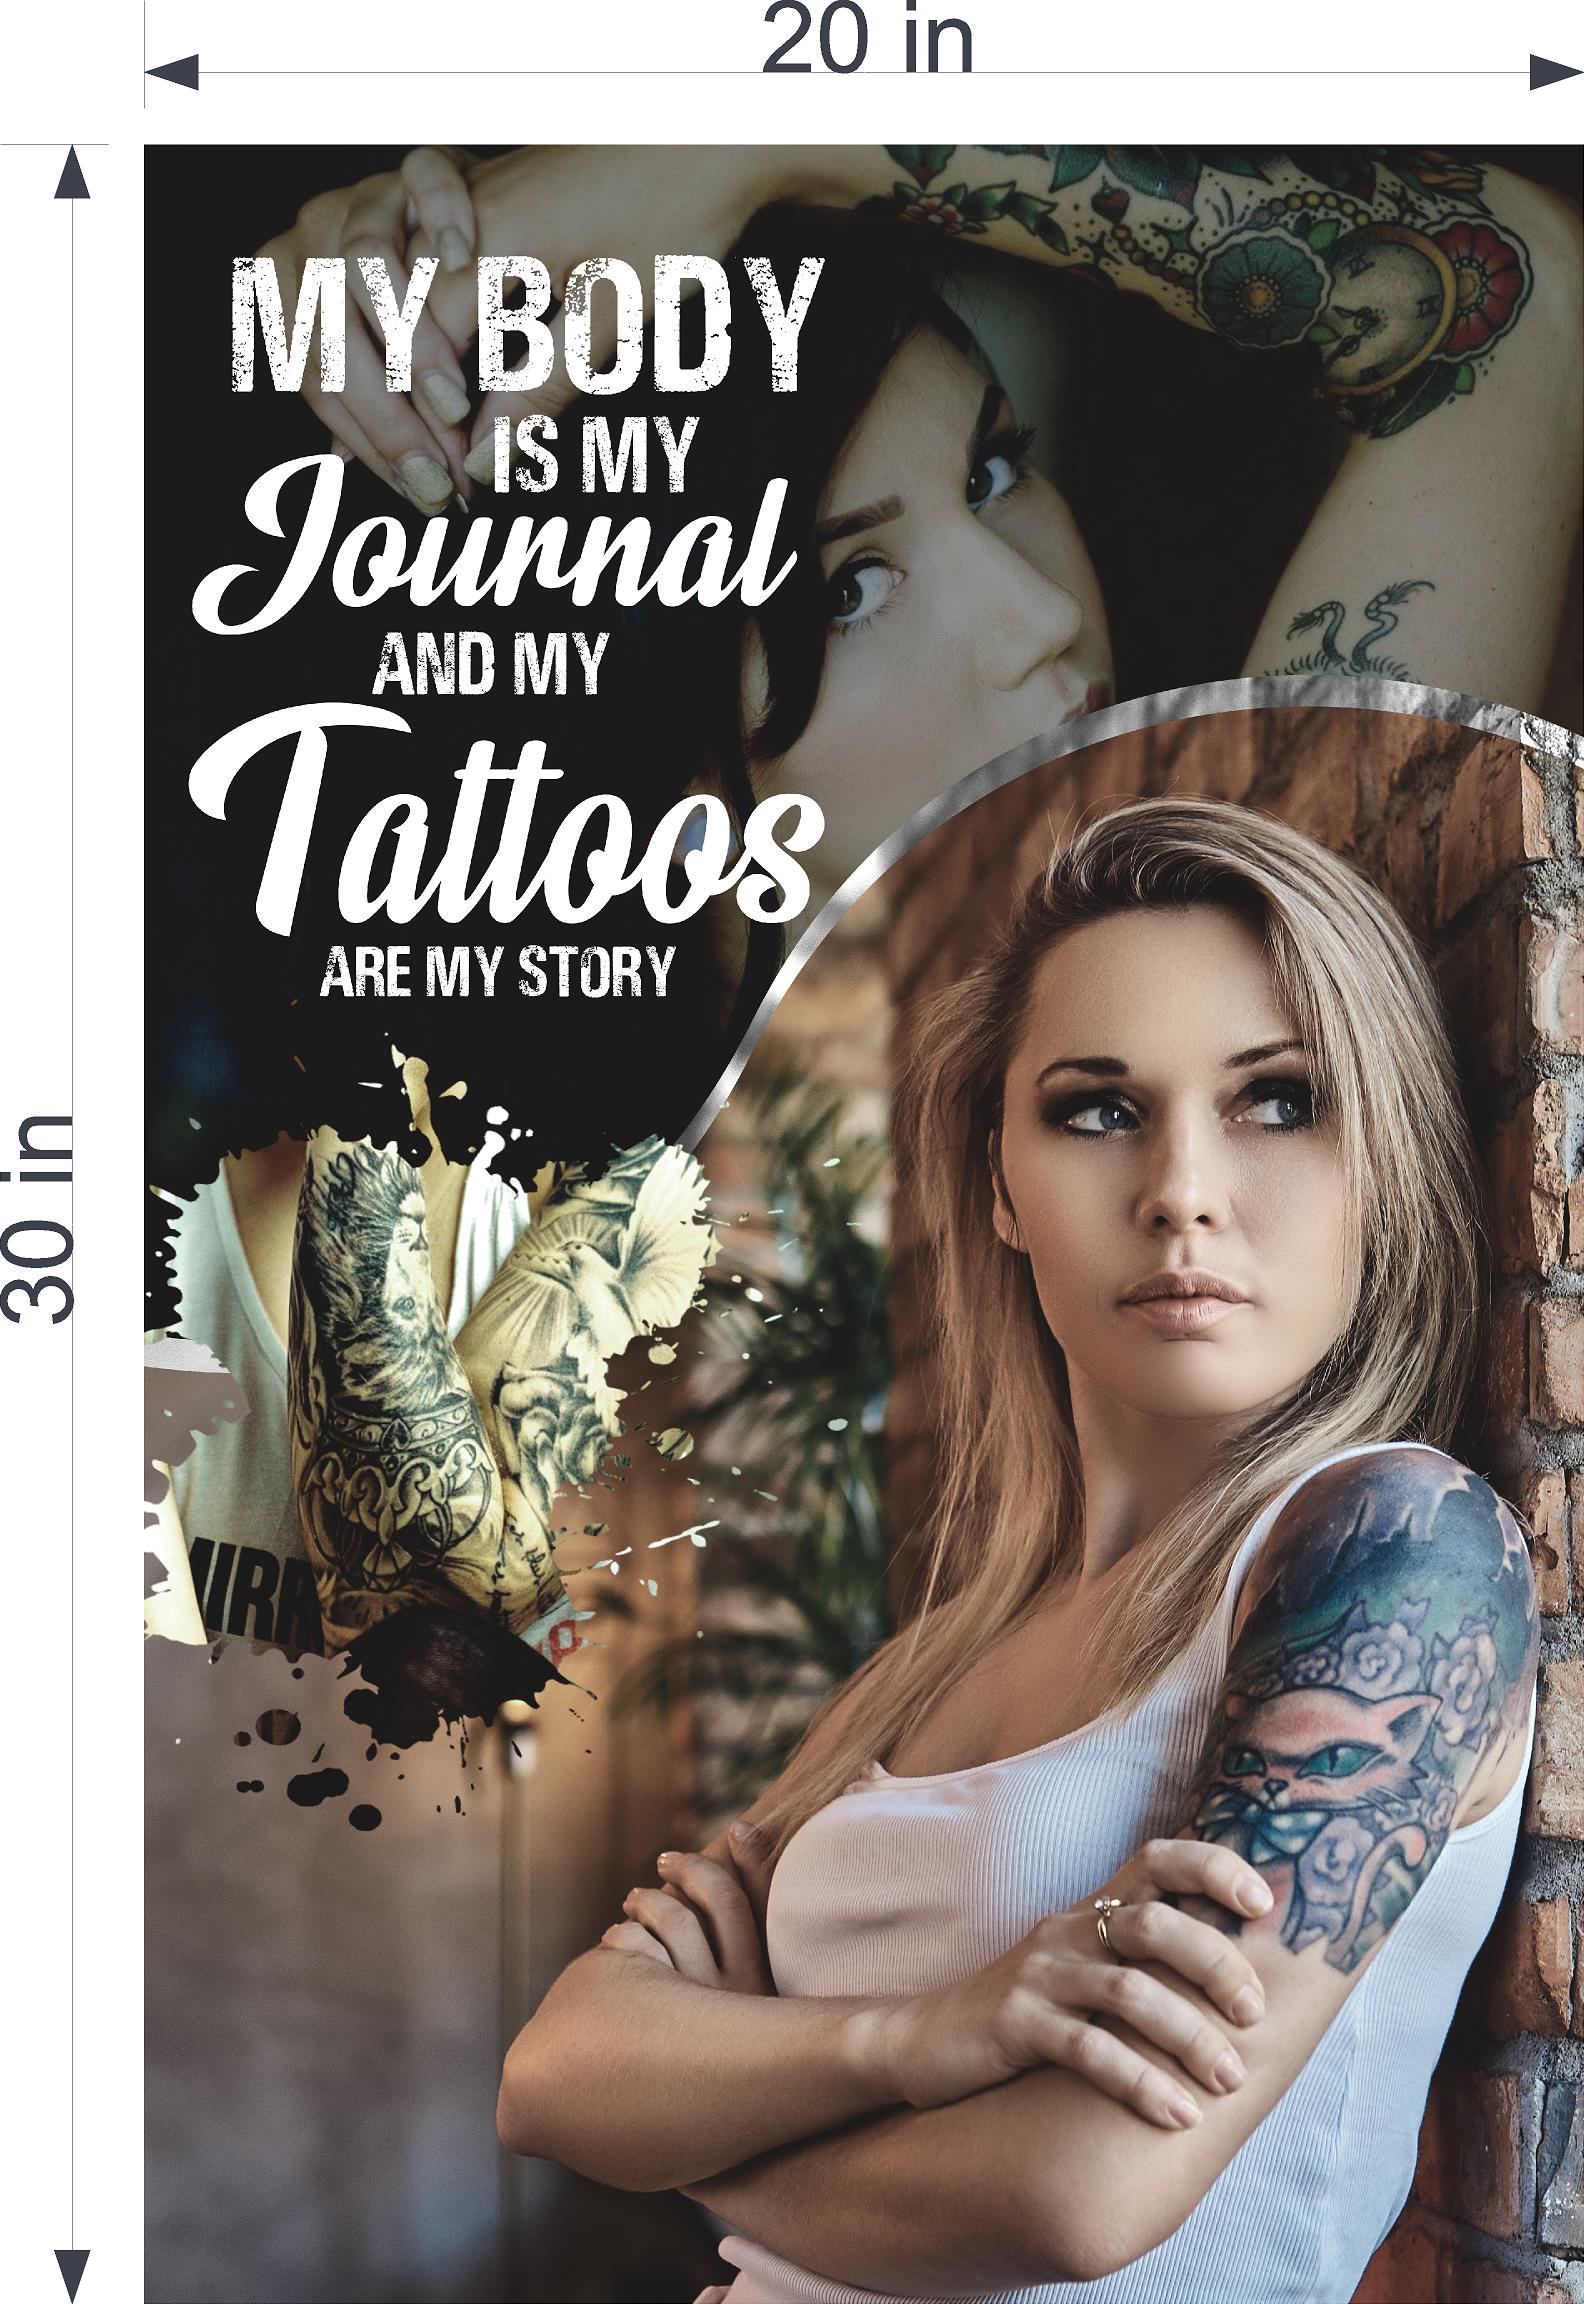 Tattoo 08 Photo-Realistic Paper Poster Premium Interior Inside Sign Wall Window Non-Laminated Skin Ink Parlor Vertical